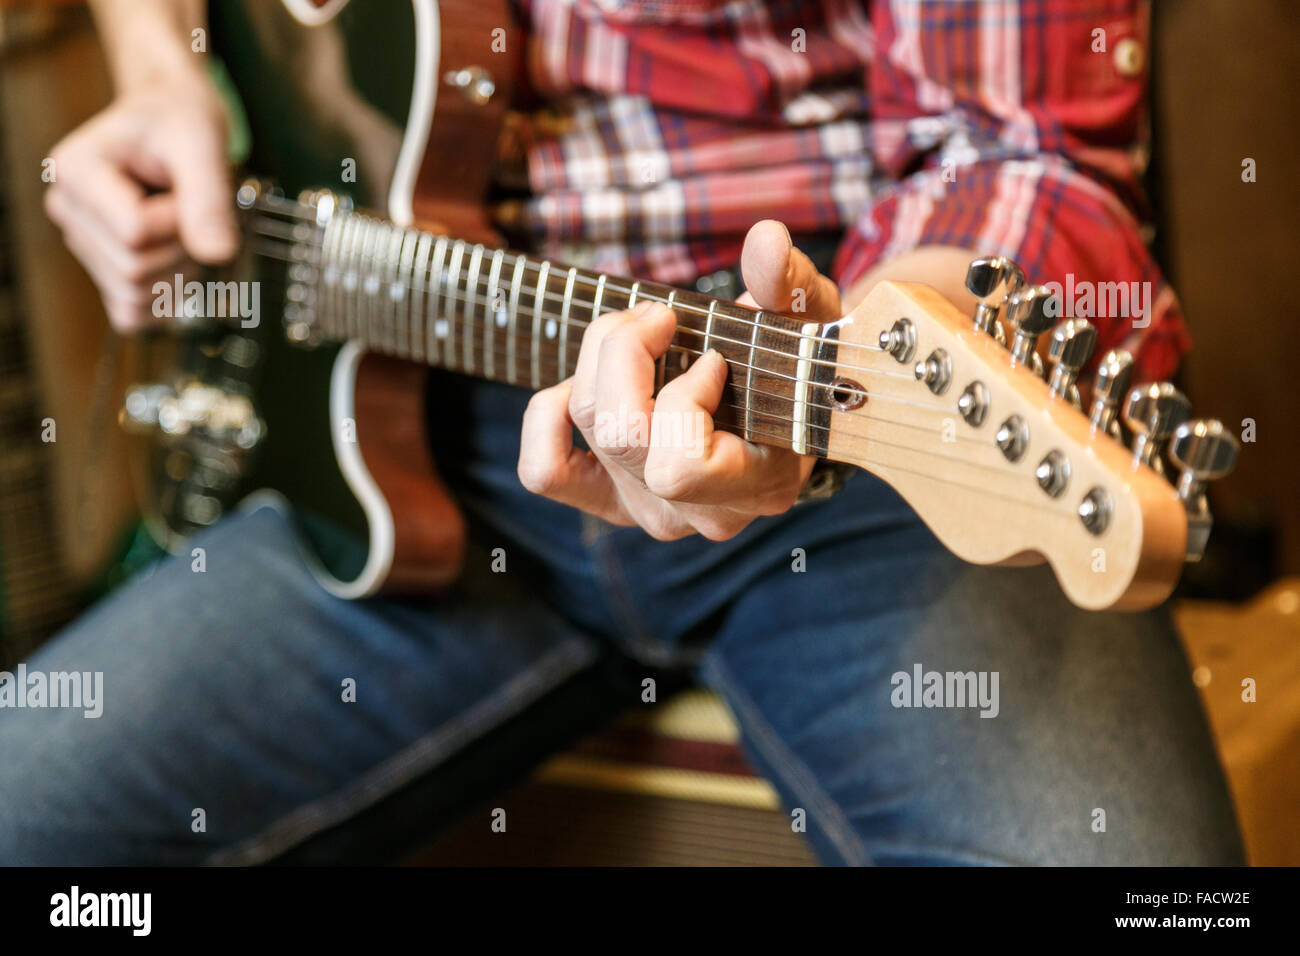 Close up view of man's hands playing electric guitar. Stock Photo